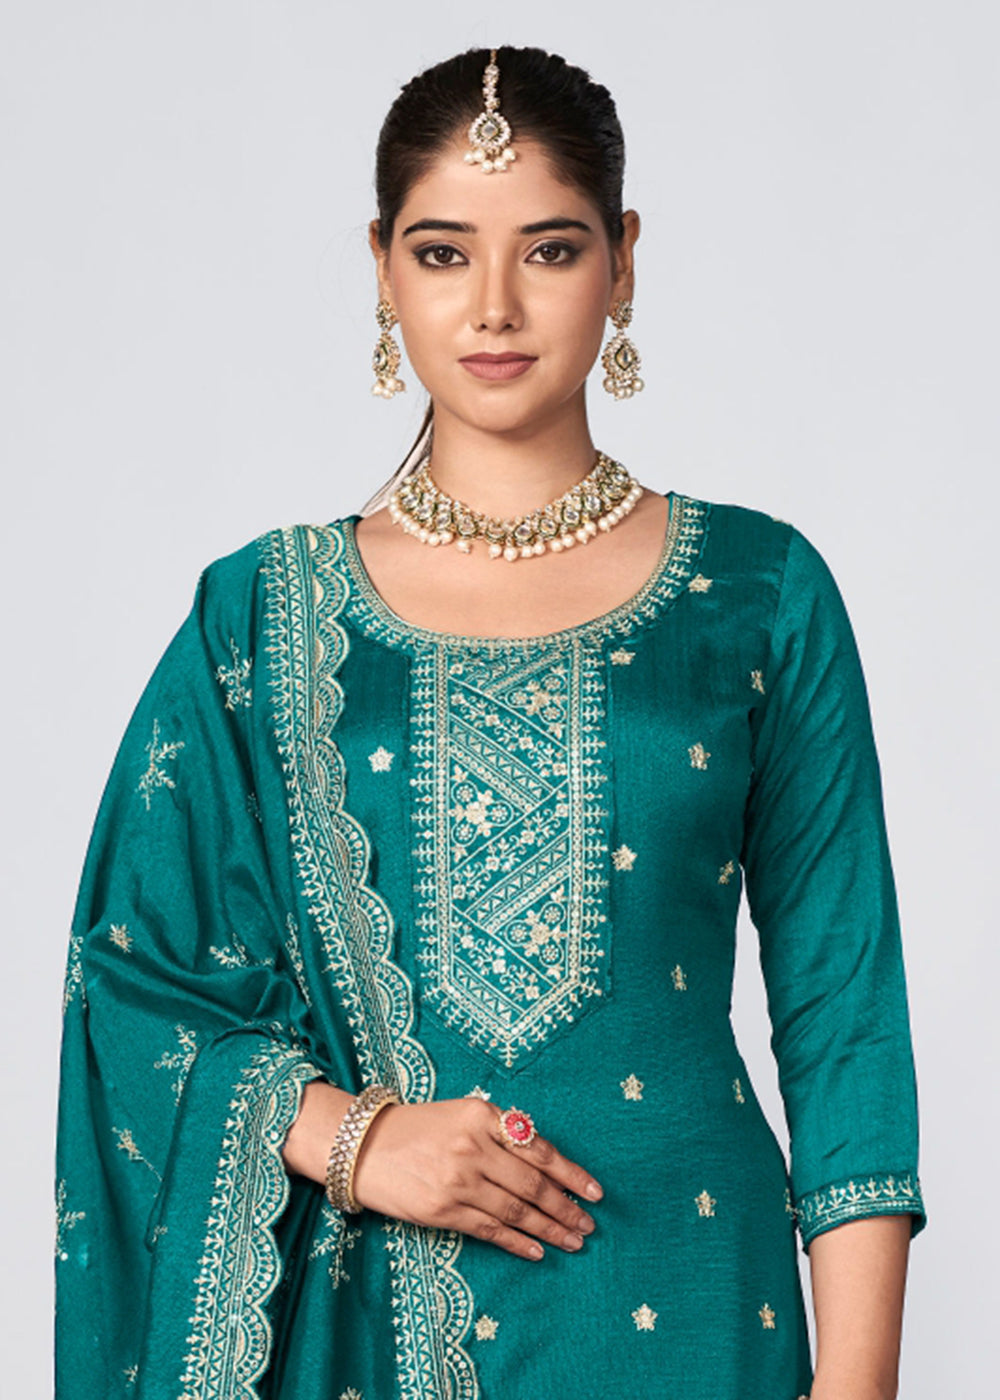 Buy Now Rama Vichitra Silk Embroidered Wedding Festive Palazzo Suit Online in USA, UK, Canada, Germany, Australia & Worldwide at Empress Clothing.